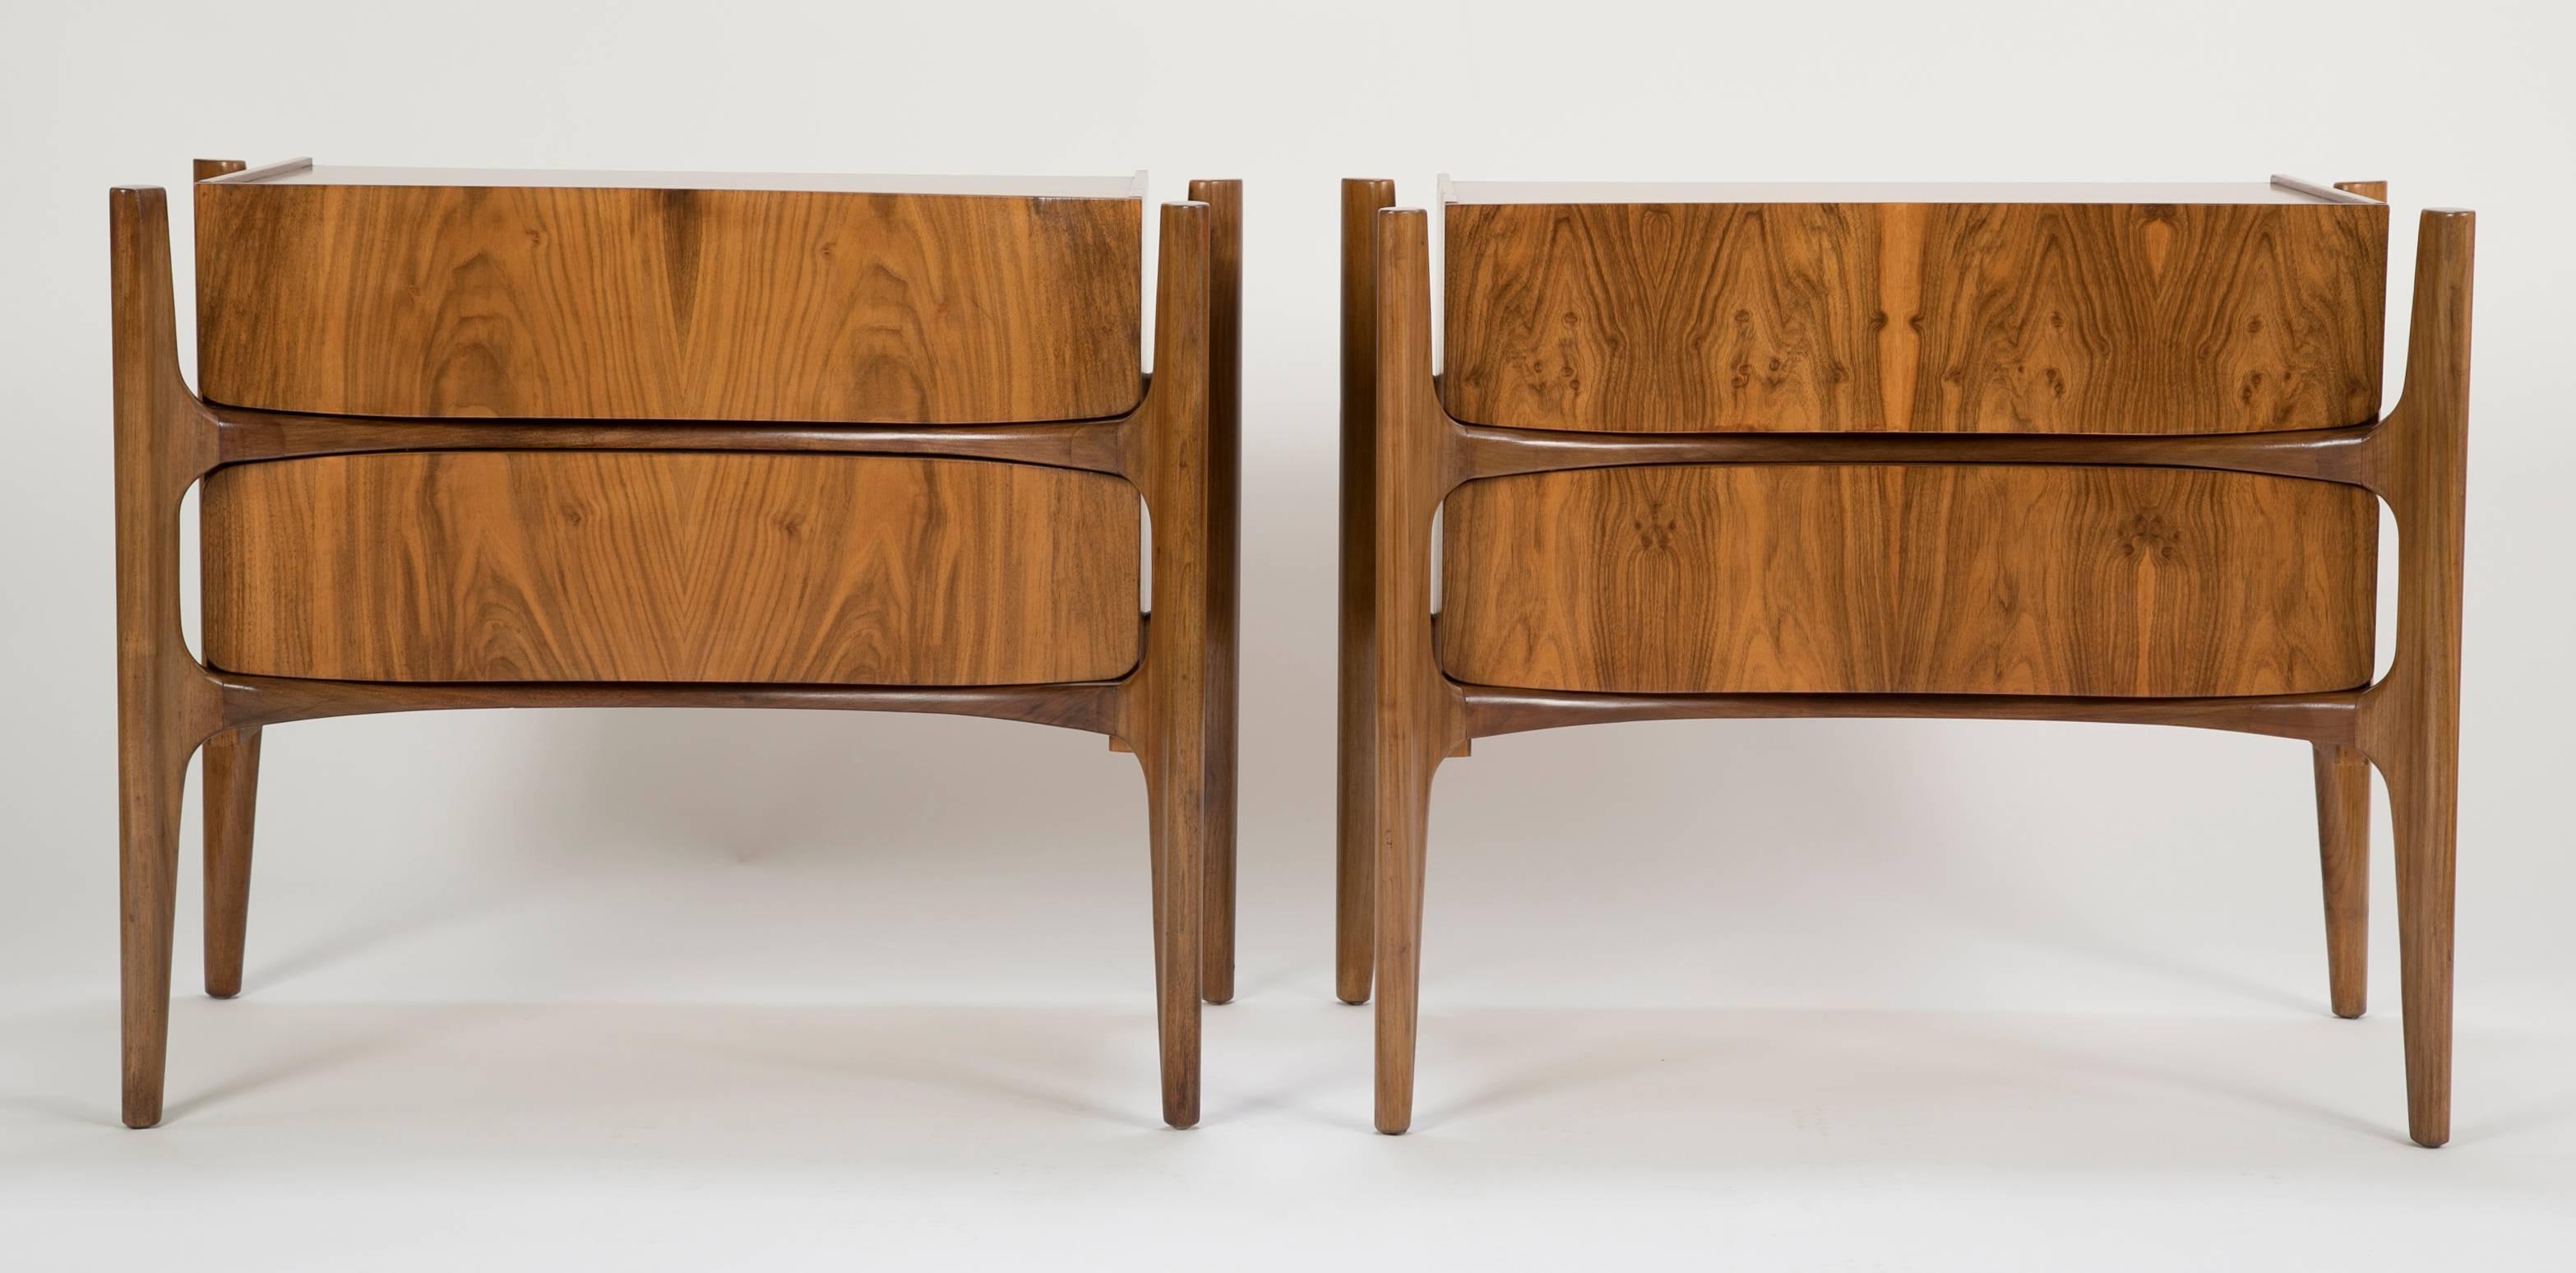 An attractive pair of Swedish walnut and birch nightstands.